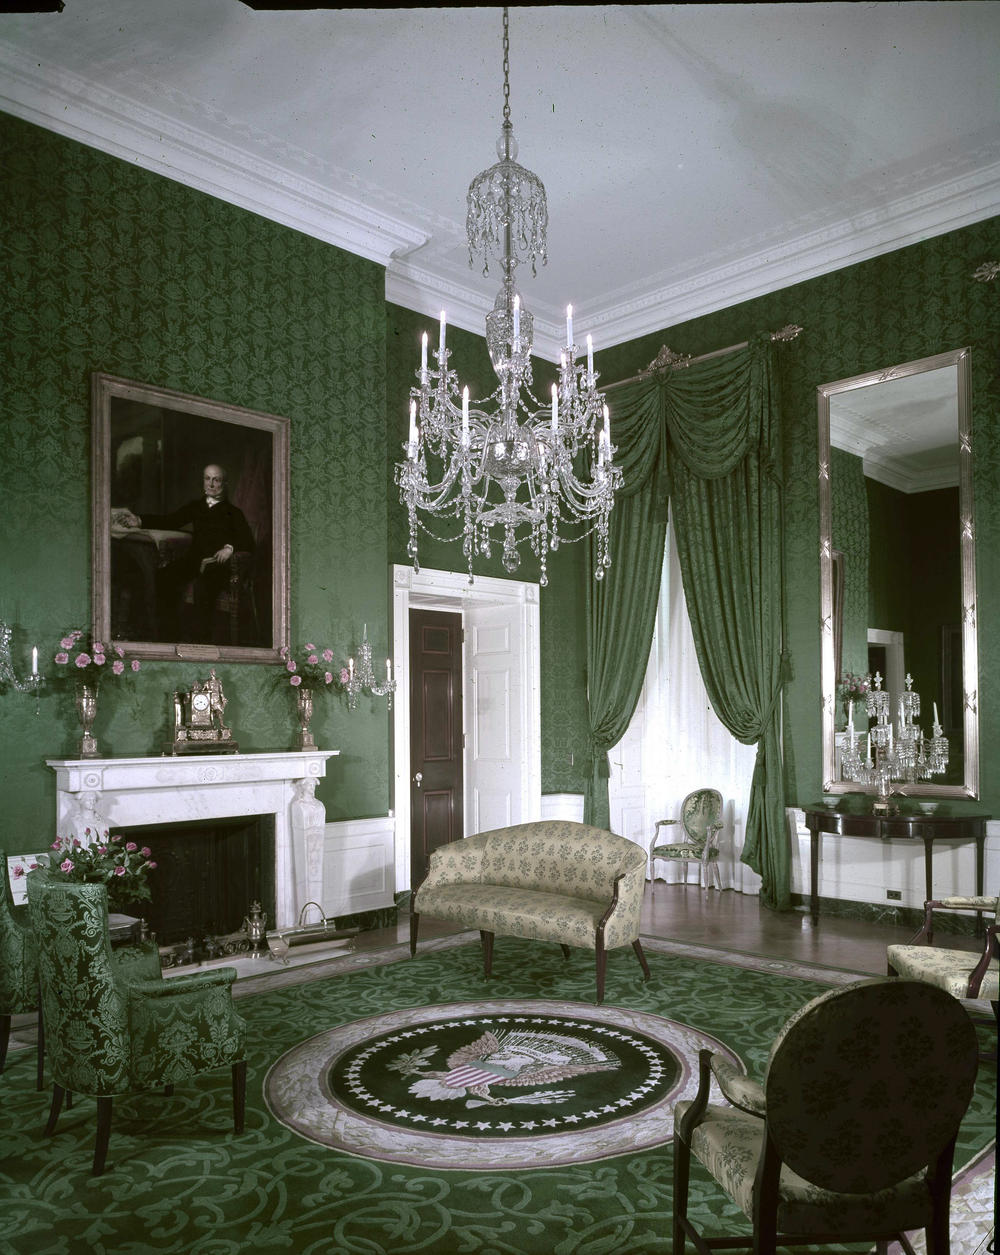 Paintings of past presidents adorn the walls as a crystal chandelier hangs from the ceiling of the Green Room on Jan. 21, 1963.